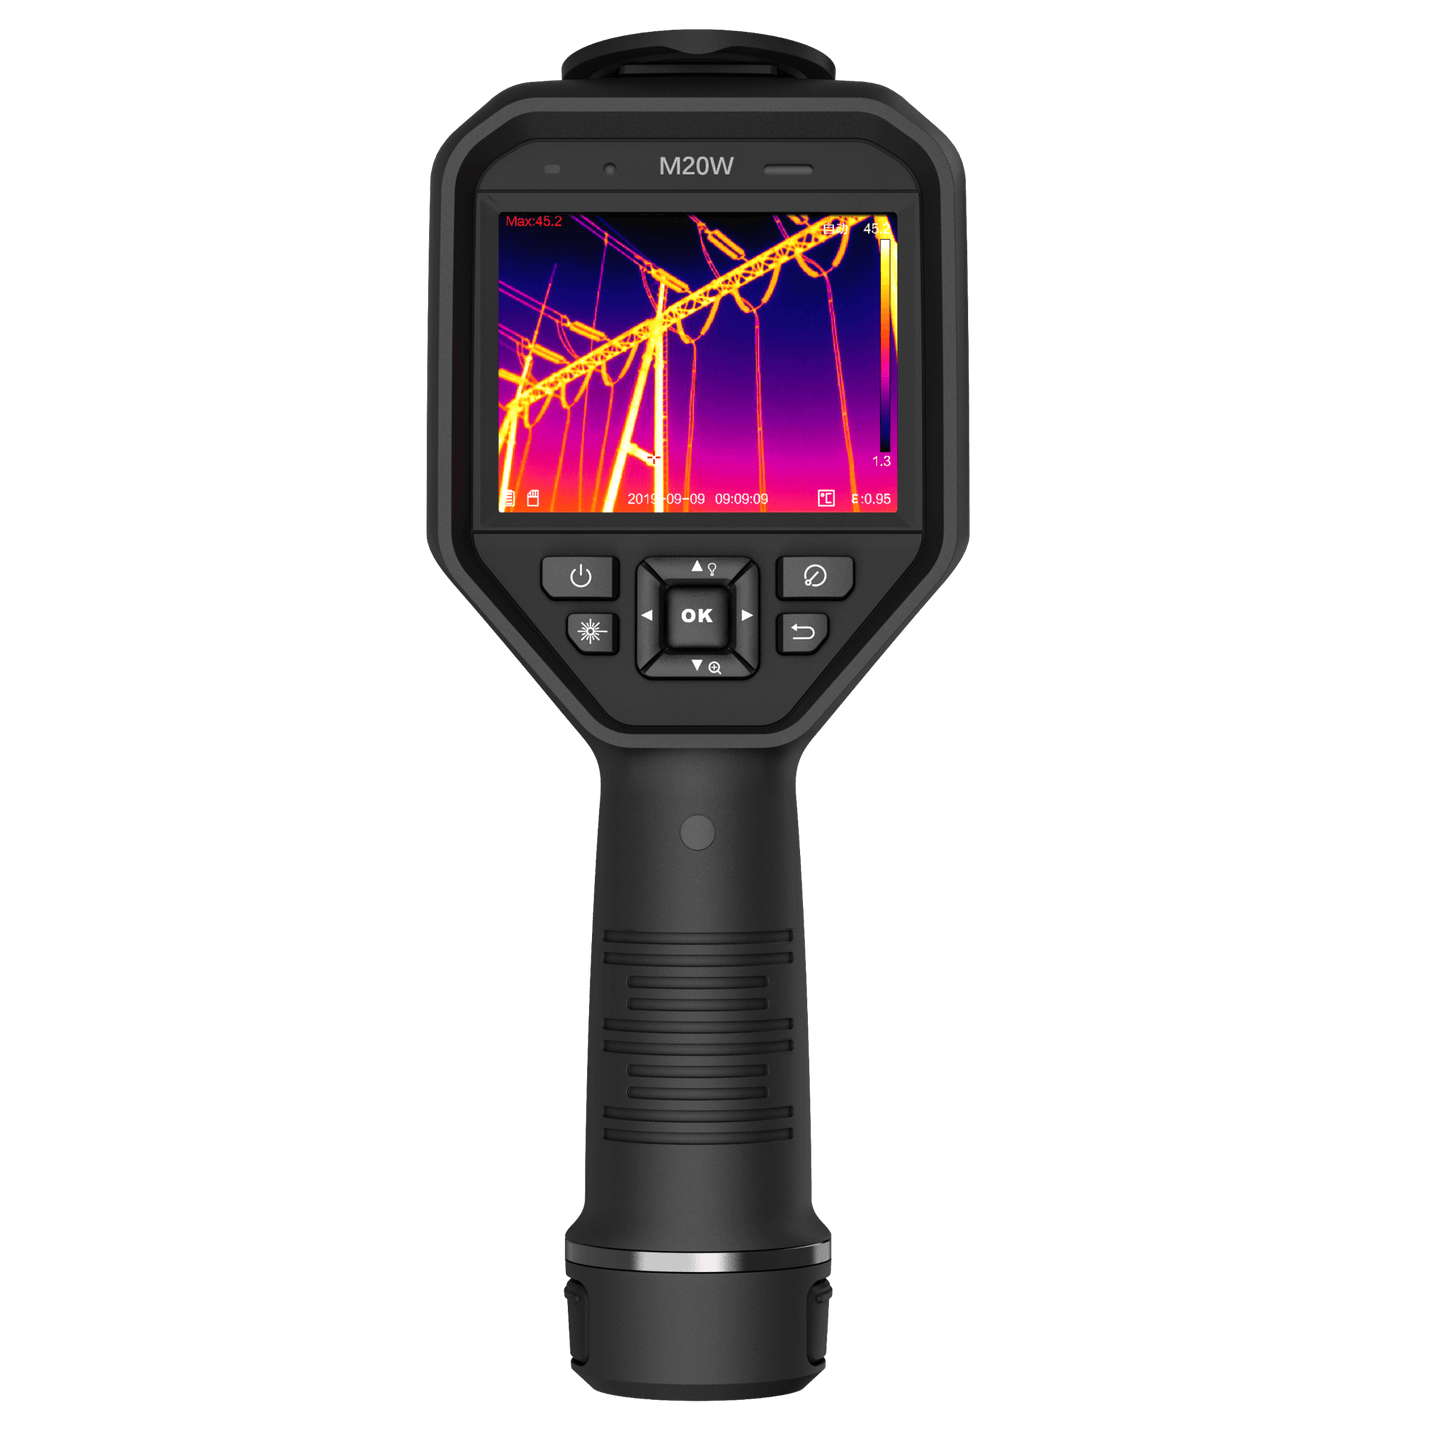 HikMicro M20W Handheld Thermography Camera on a transparent background - Screen View